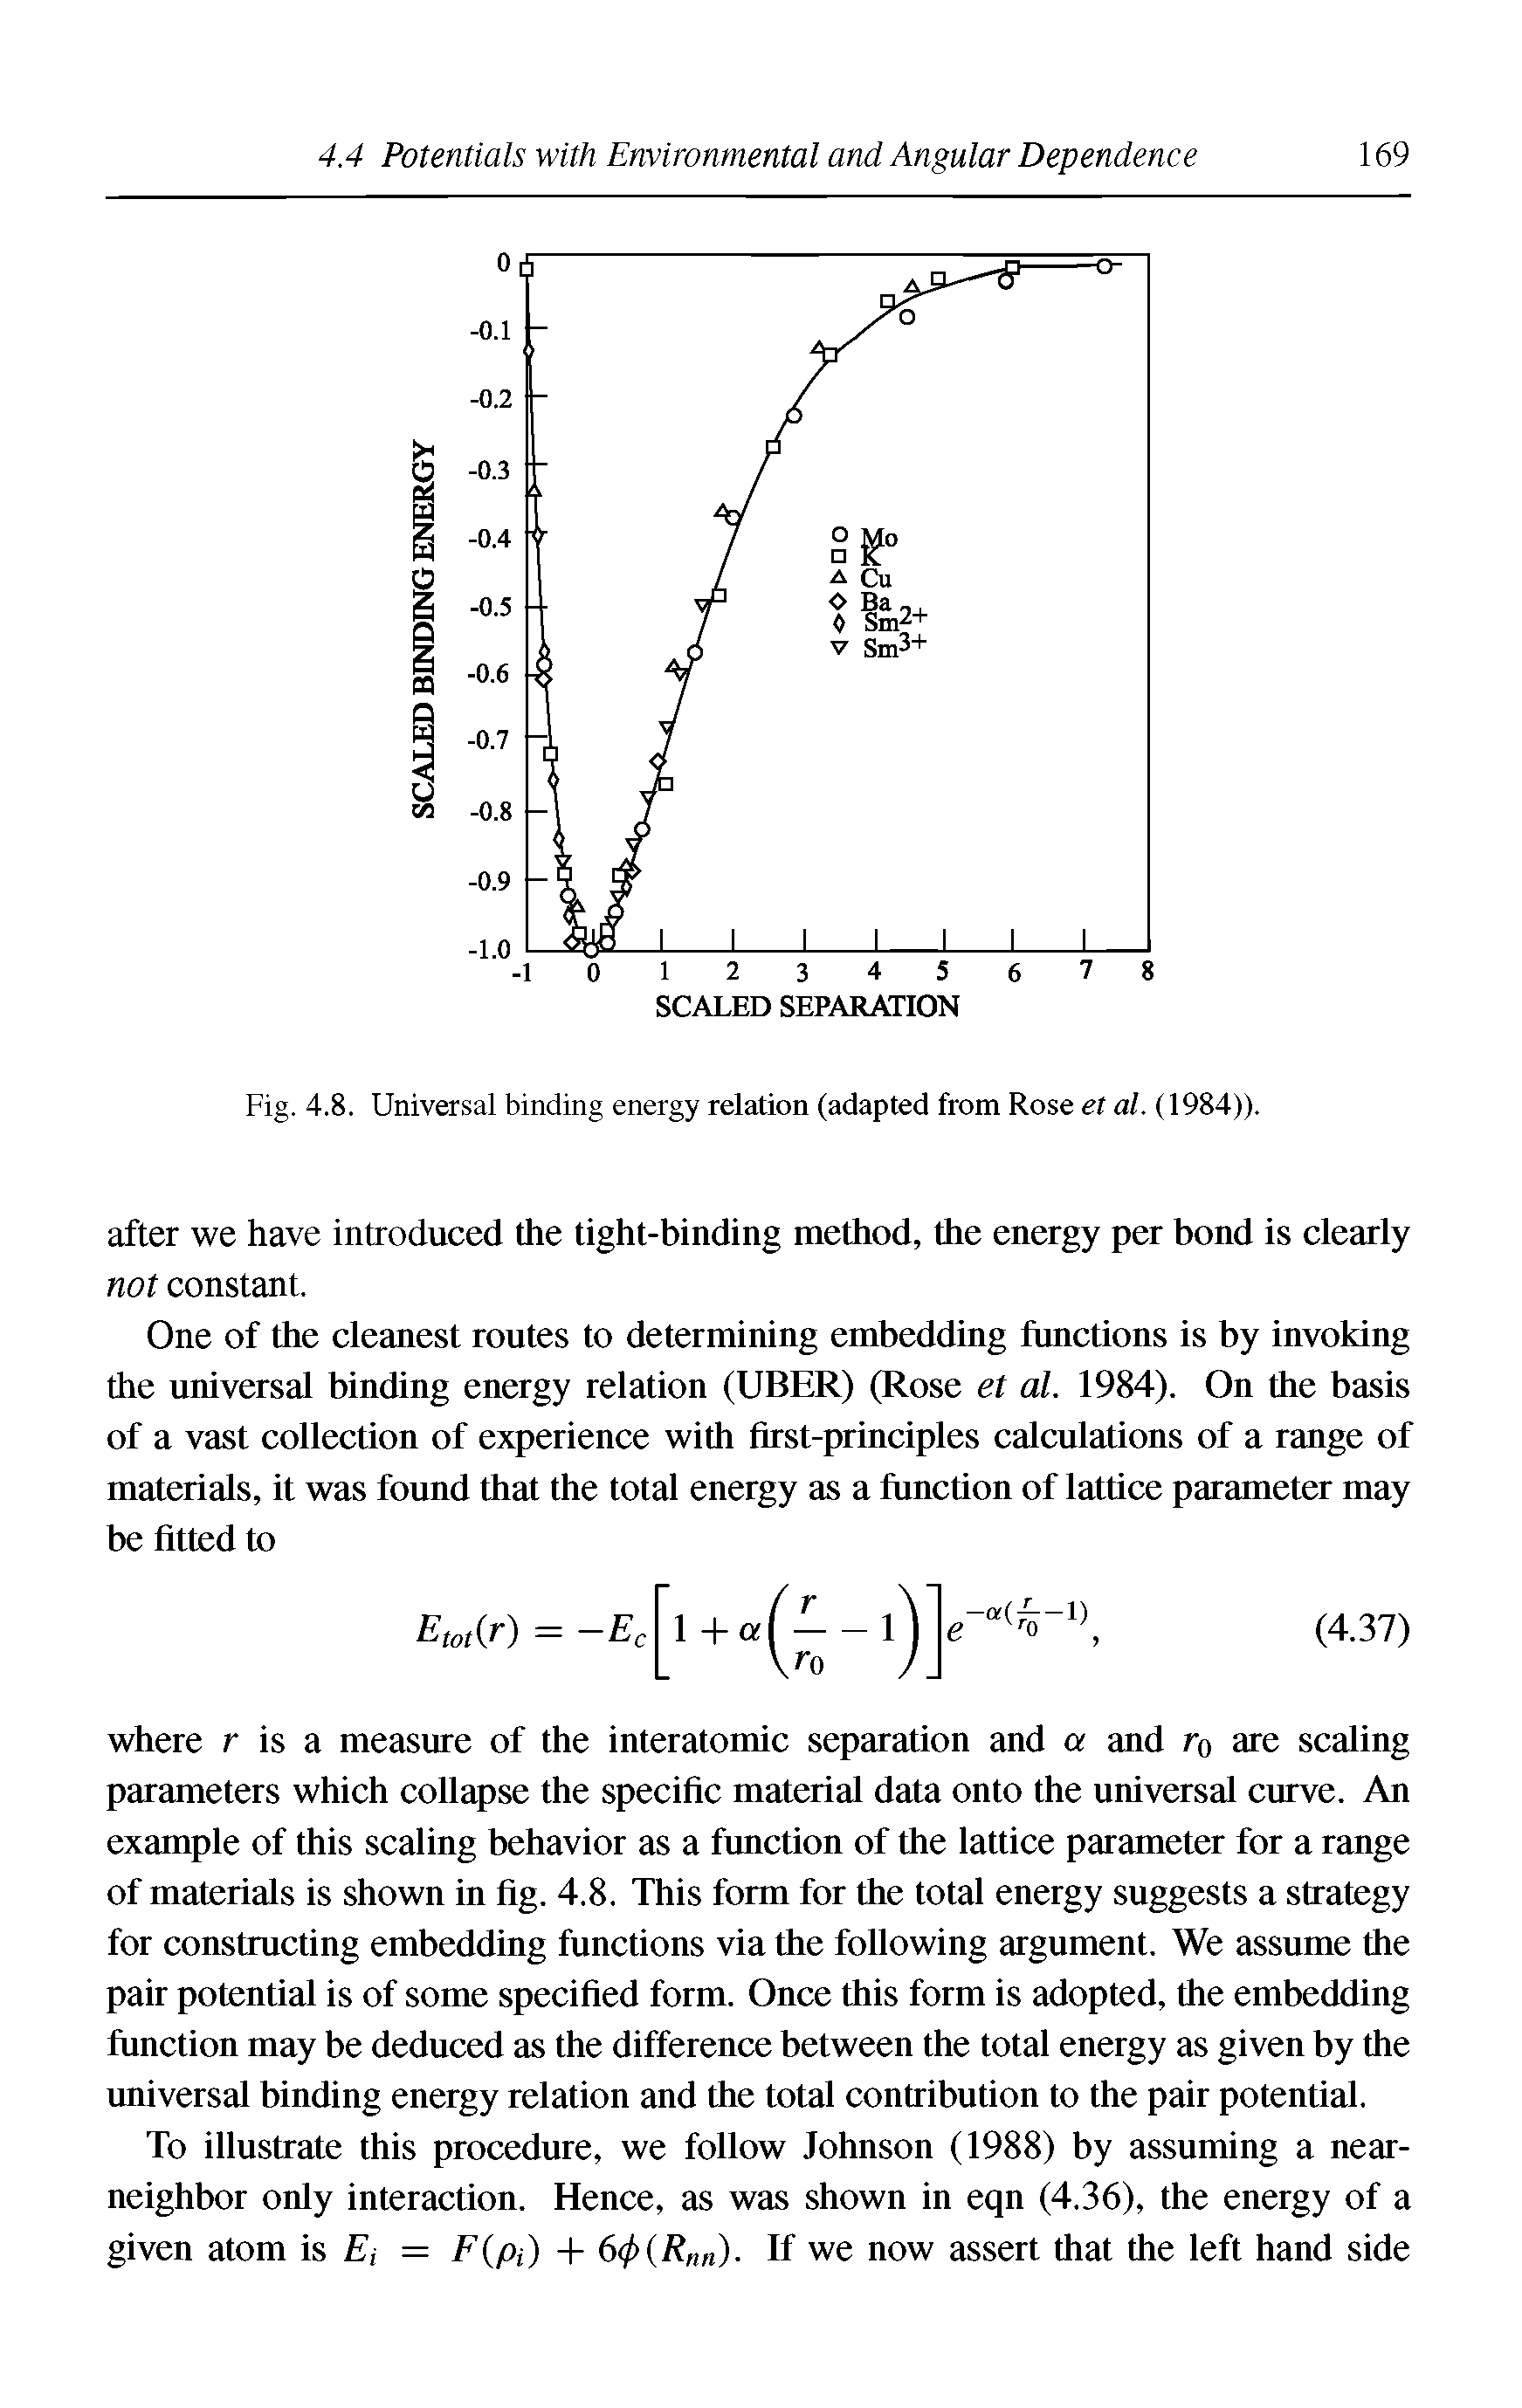 Fig. 4.8. Universal binding energy relation (adapted from Rose et al. (1984)).